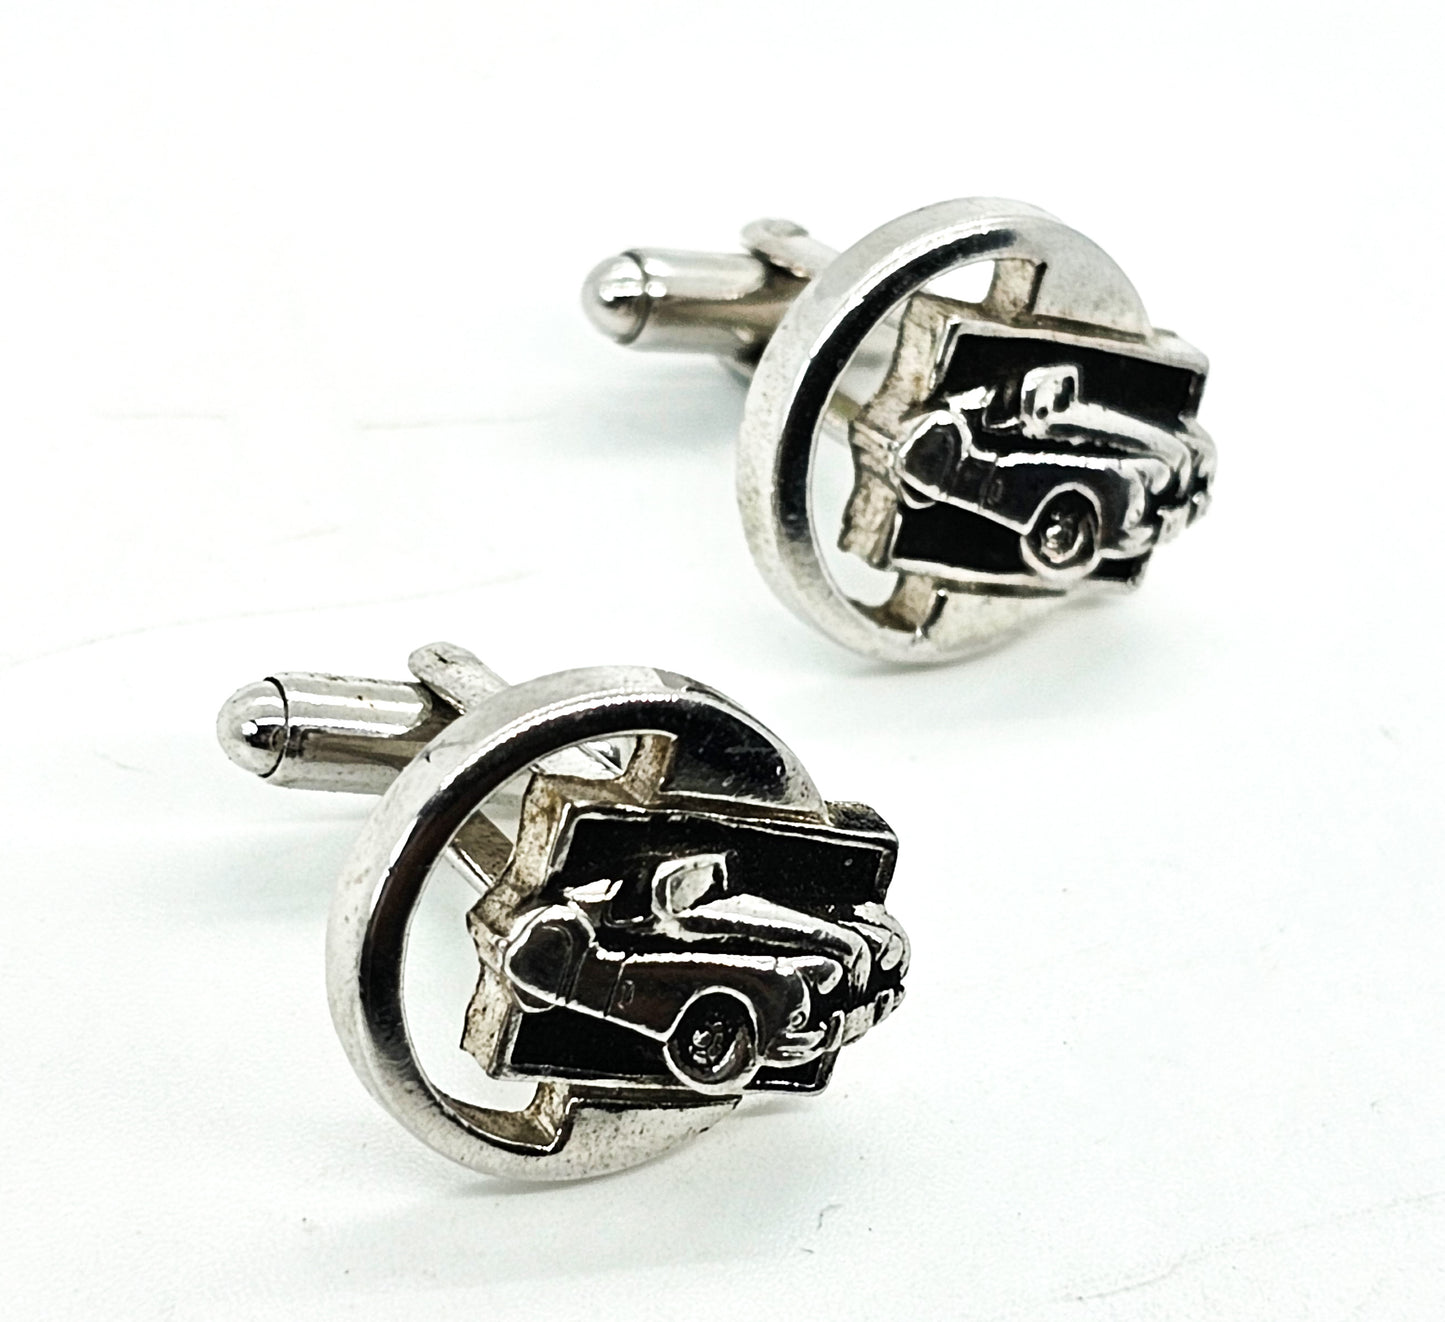 Chevy Car vintage silver toned open work cuff links